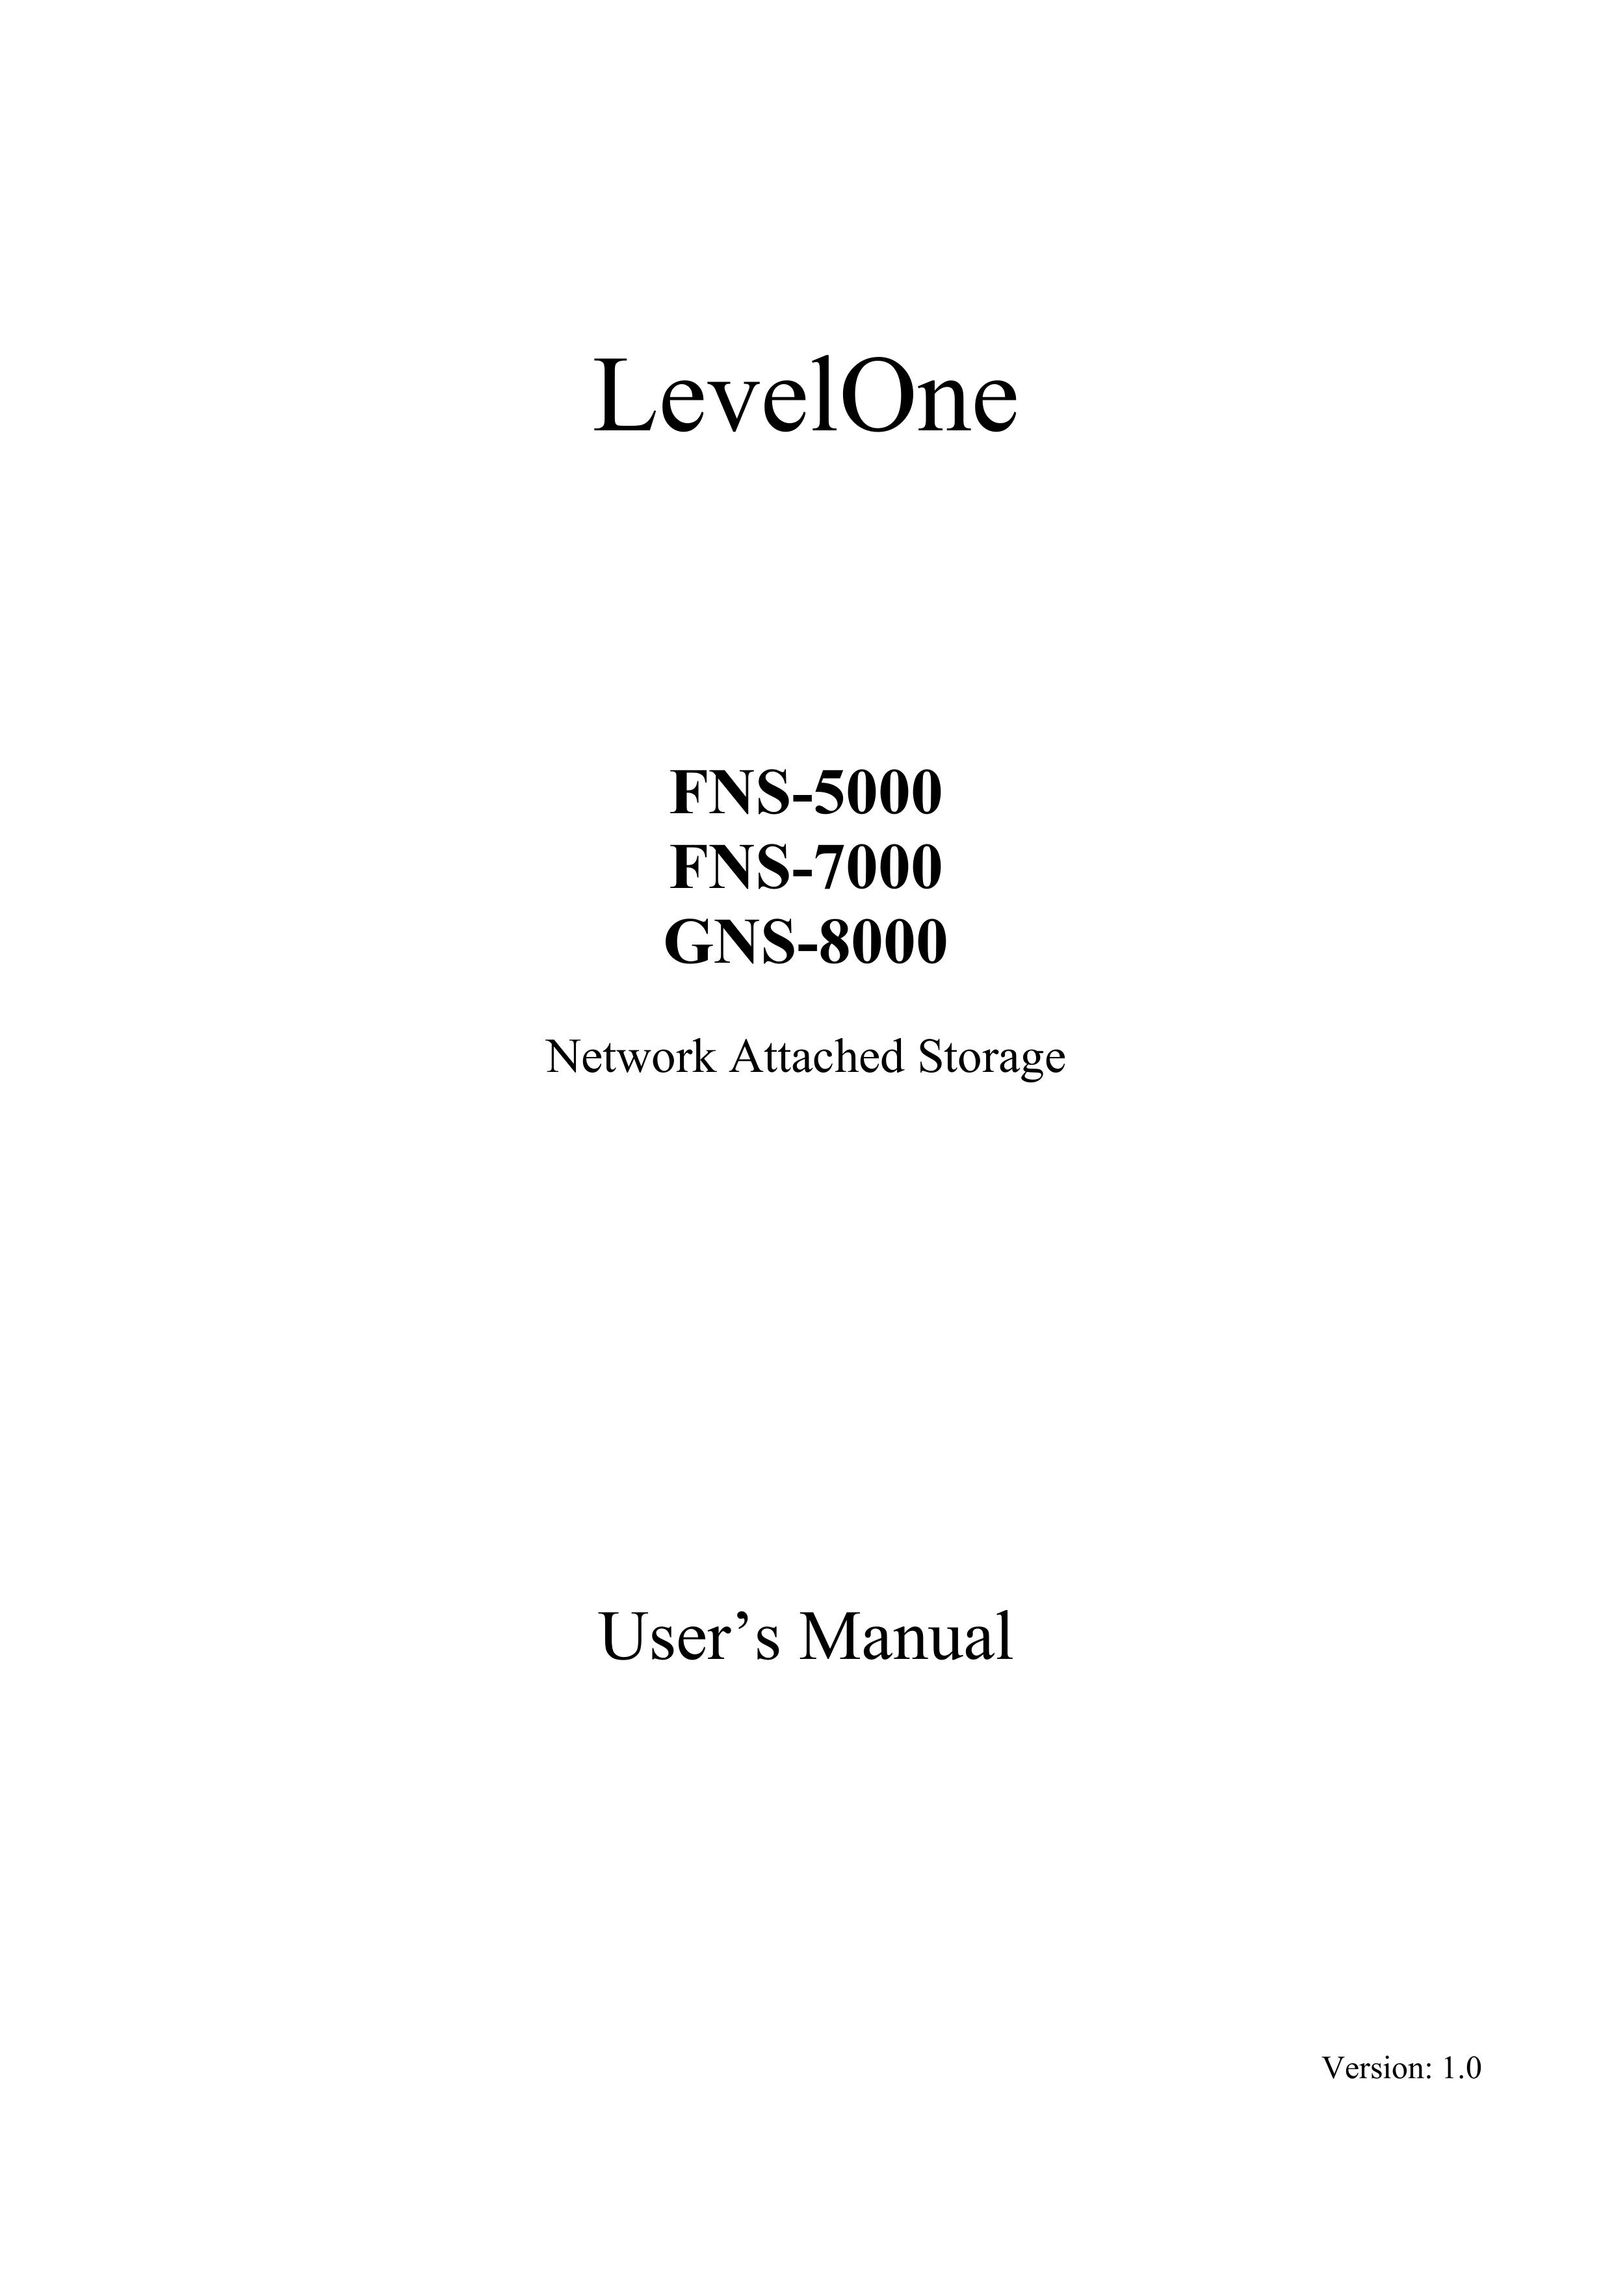 LevelOne FNS-7000 Network Card User Manual